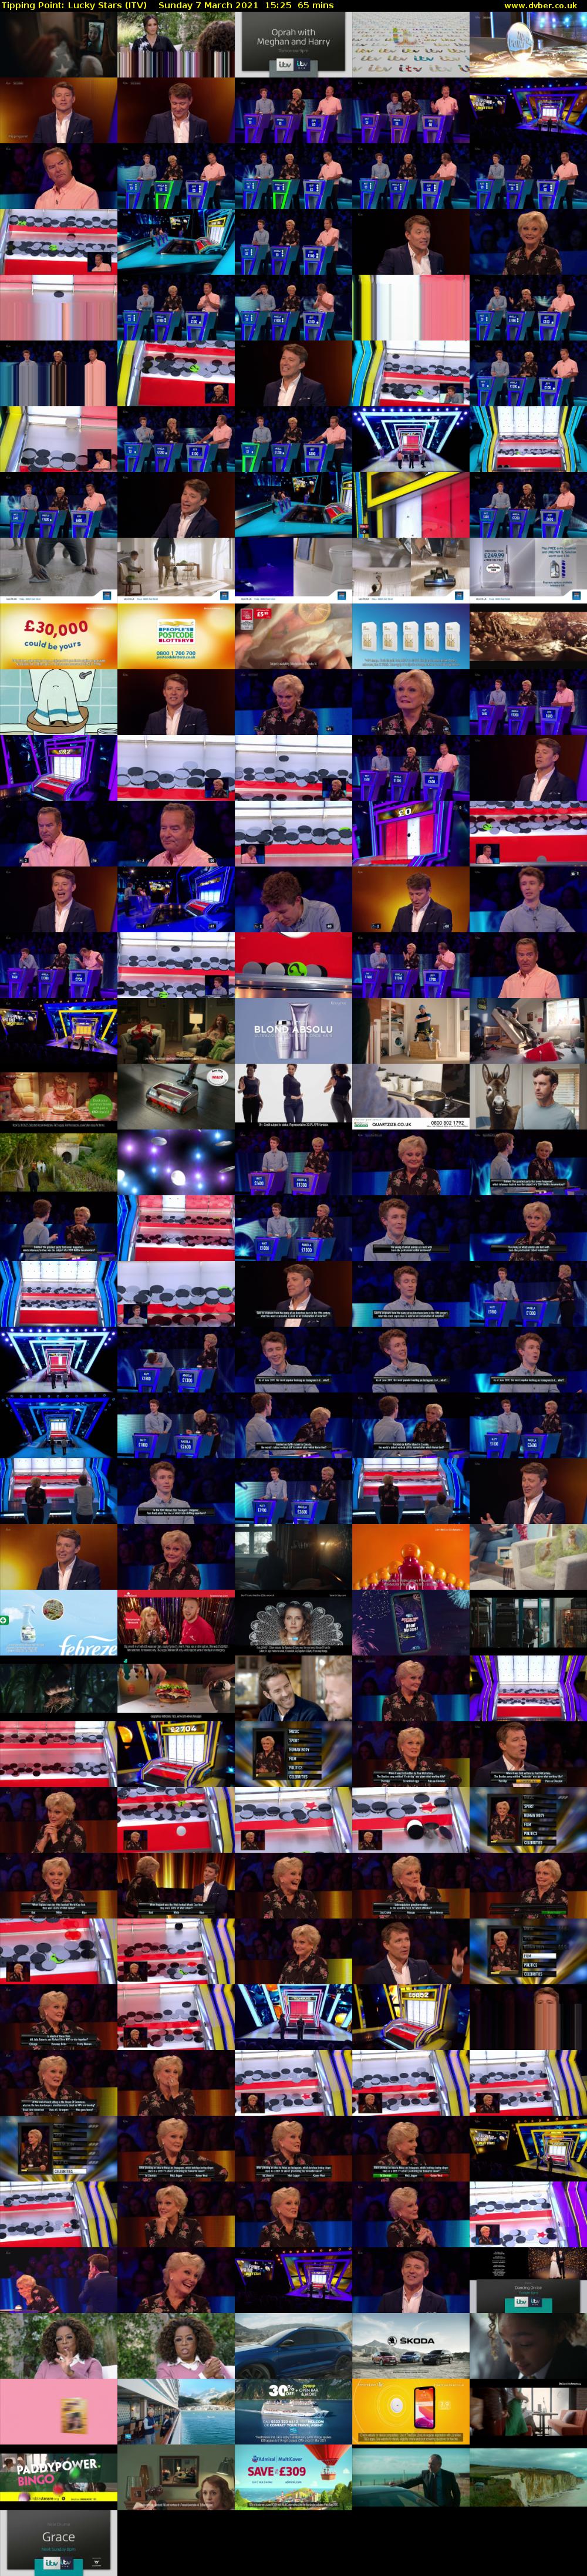 Tipping Point Lucky Stars (ITV HD) 202103071525